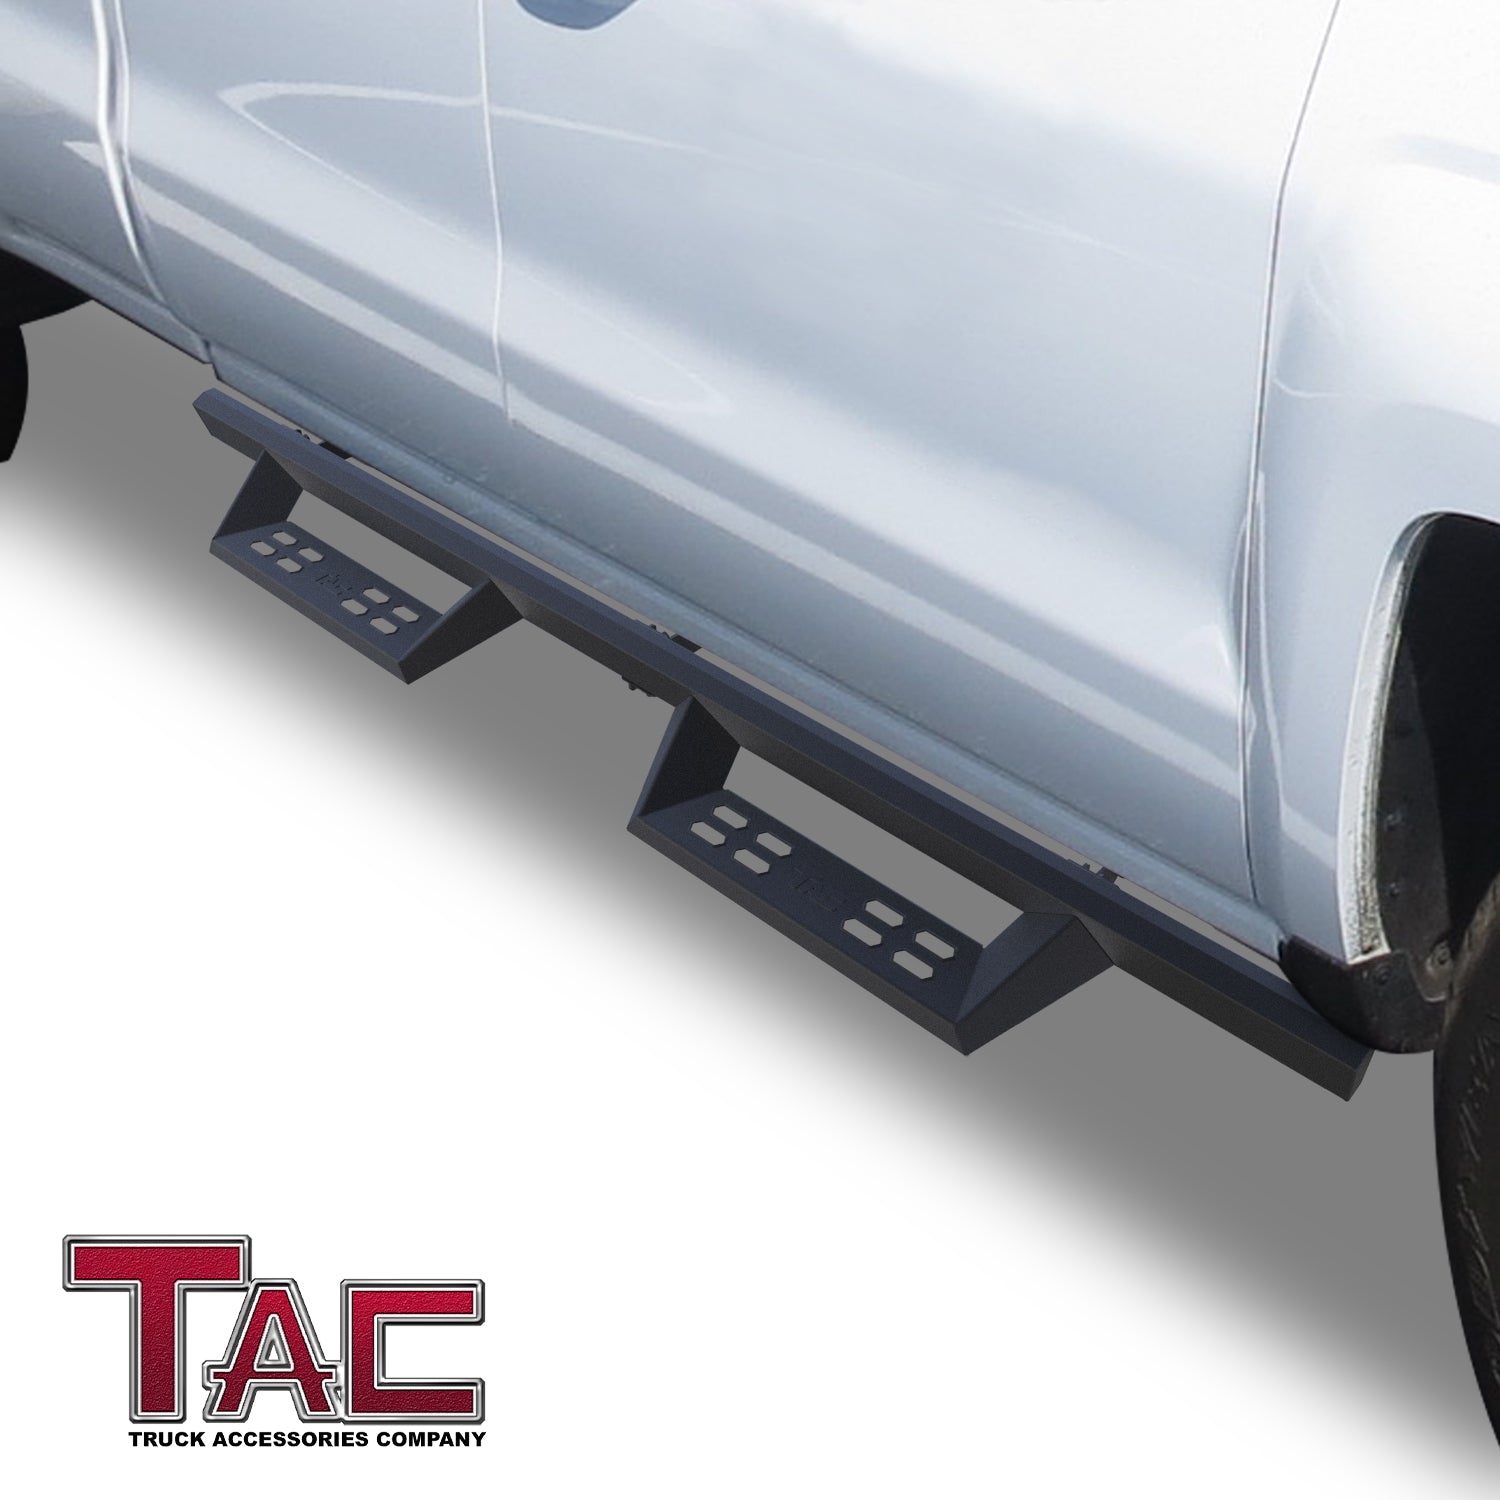 TAC Sniper Running Boards Fit 2007-2018 Chevy Silverado/GMC Sierra 1500 | 2007-2019 2500/3500 Extended/Double Cab (Incl. 2019 Silverado 1500 LD/Sierra 1500 Limited) Truck Pickup 4" Black Side Steps Nerf Bars 2pcs - 0